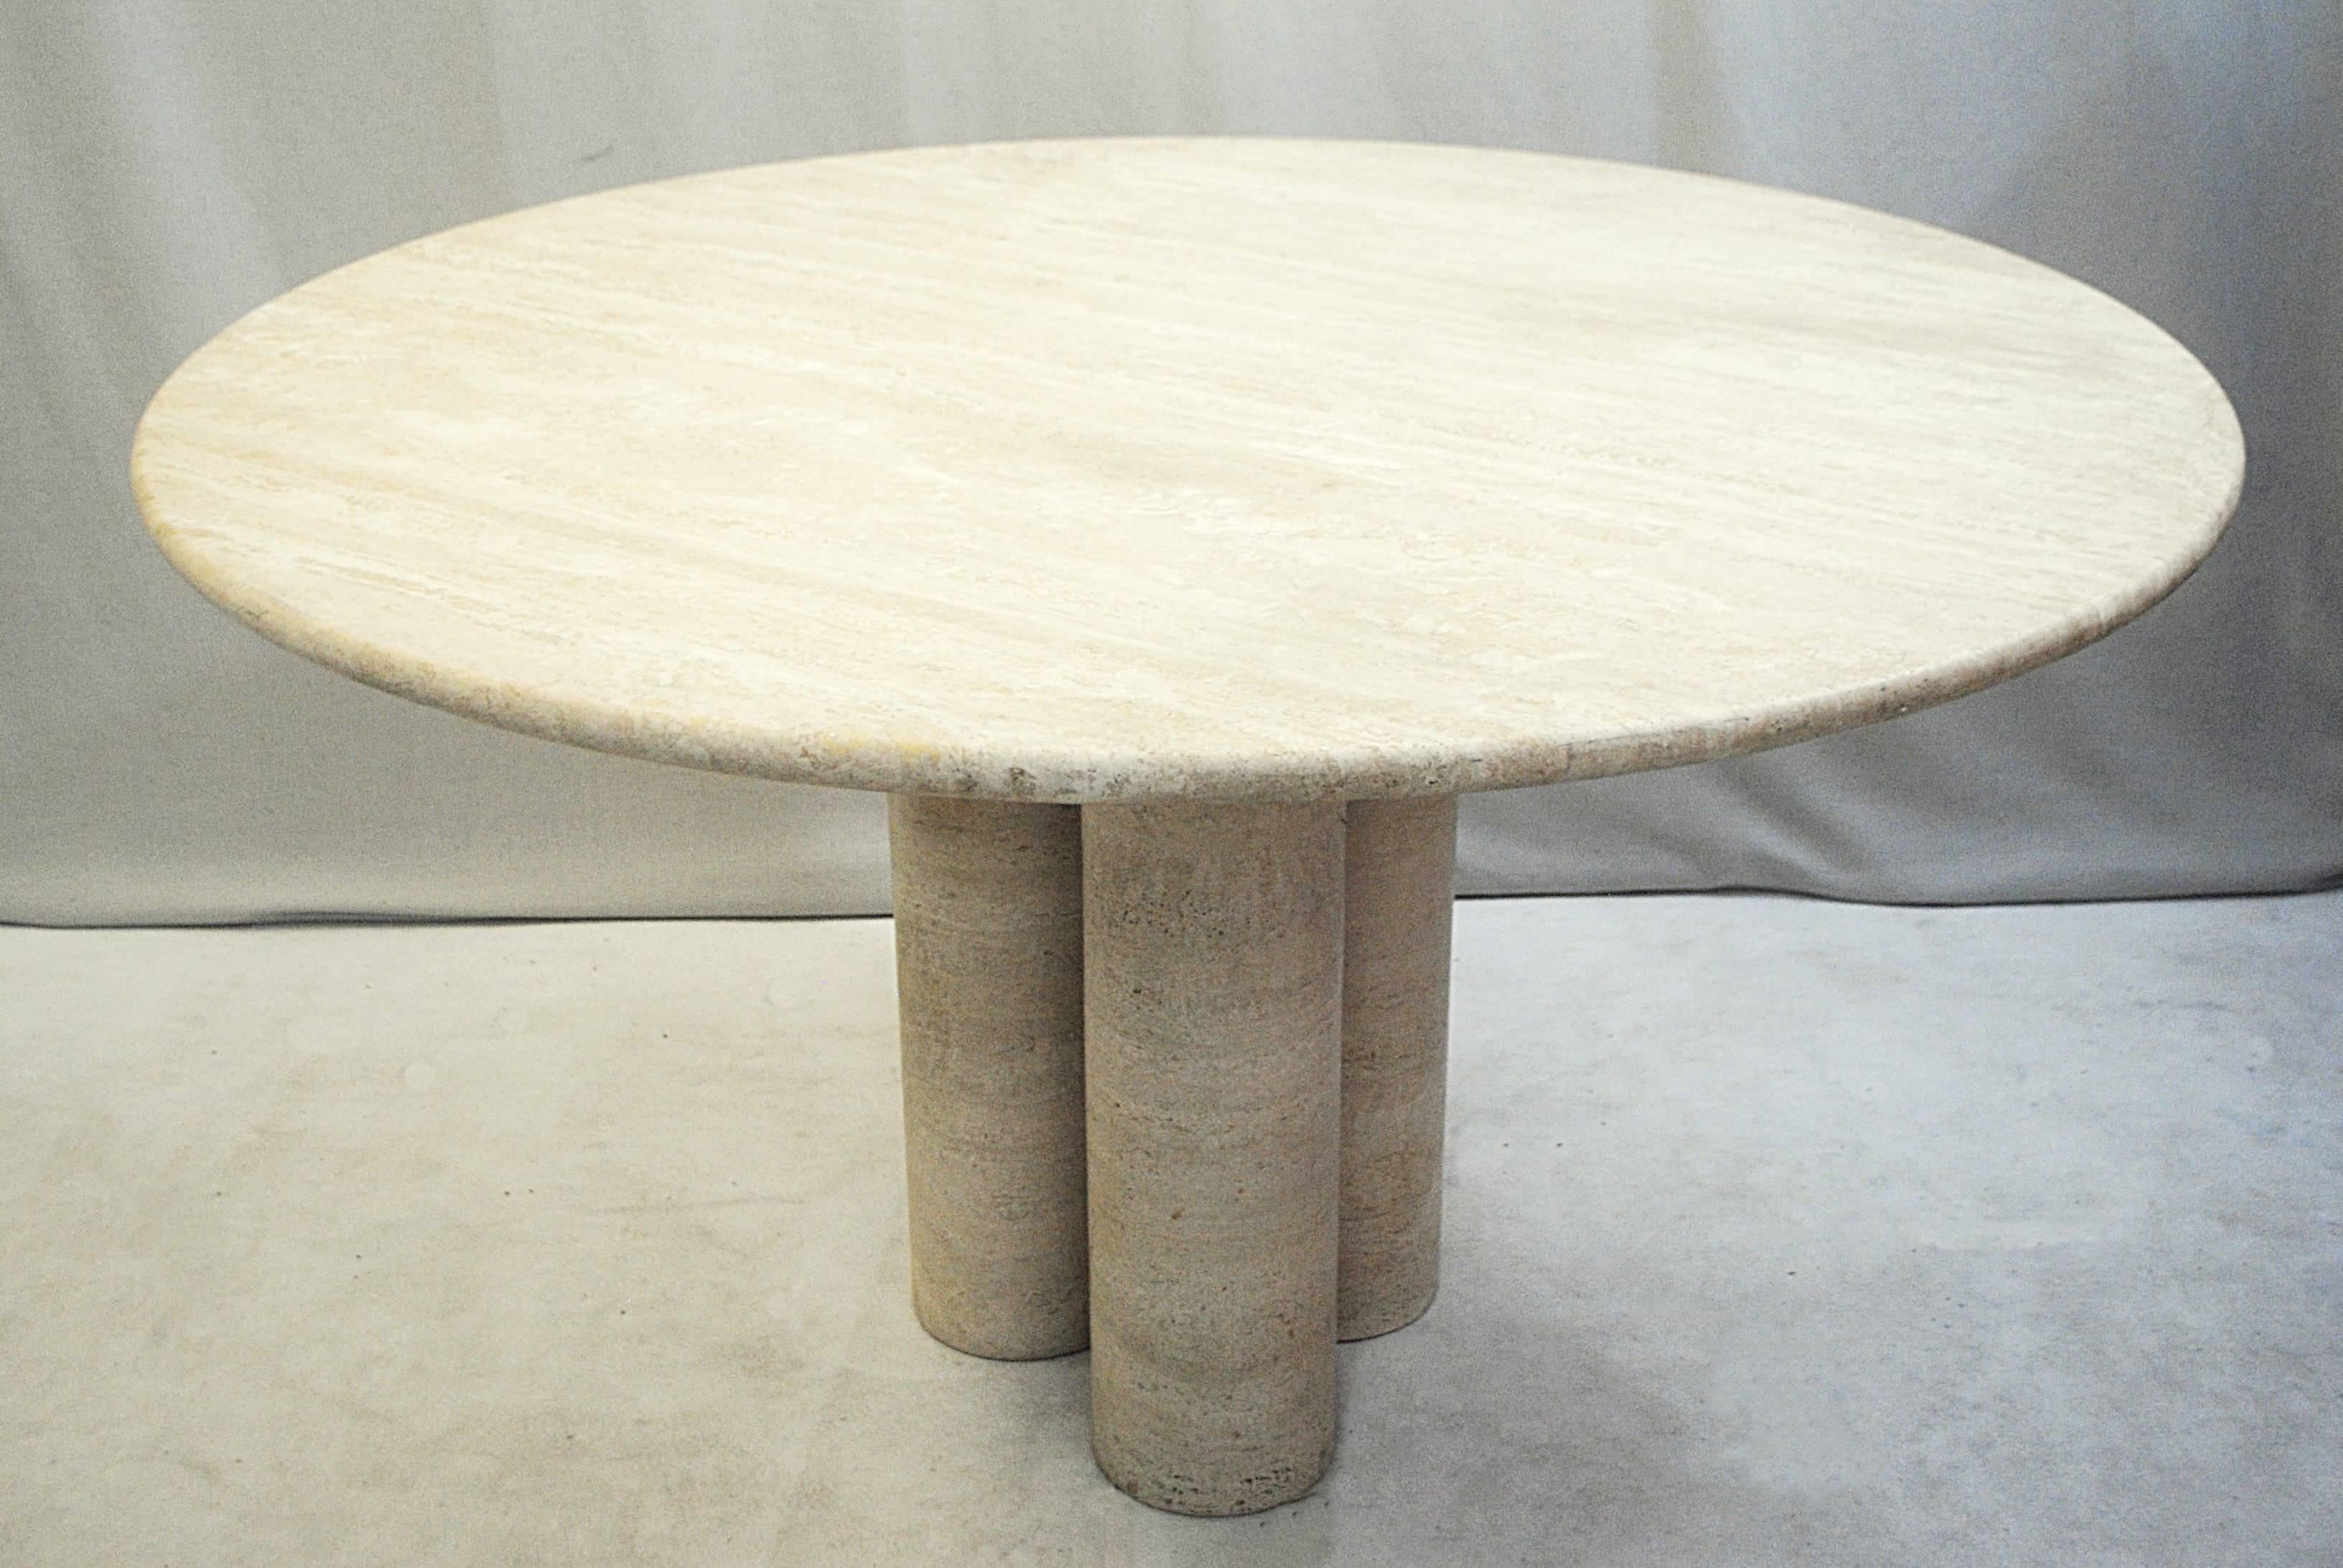 Round travertin centre table by Mario Bellini, 1970s, Italy

The 3 feet are fixed to the tray.